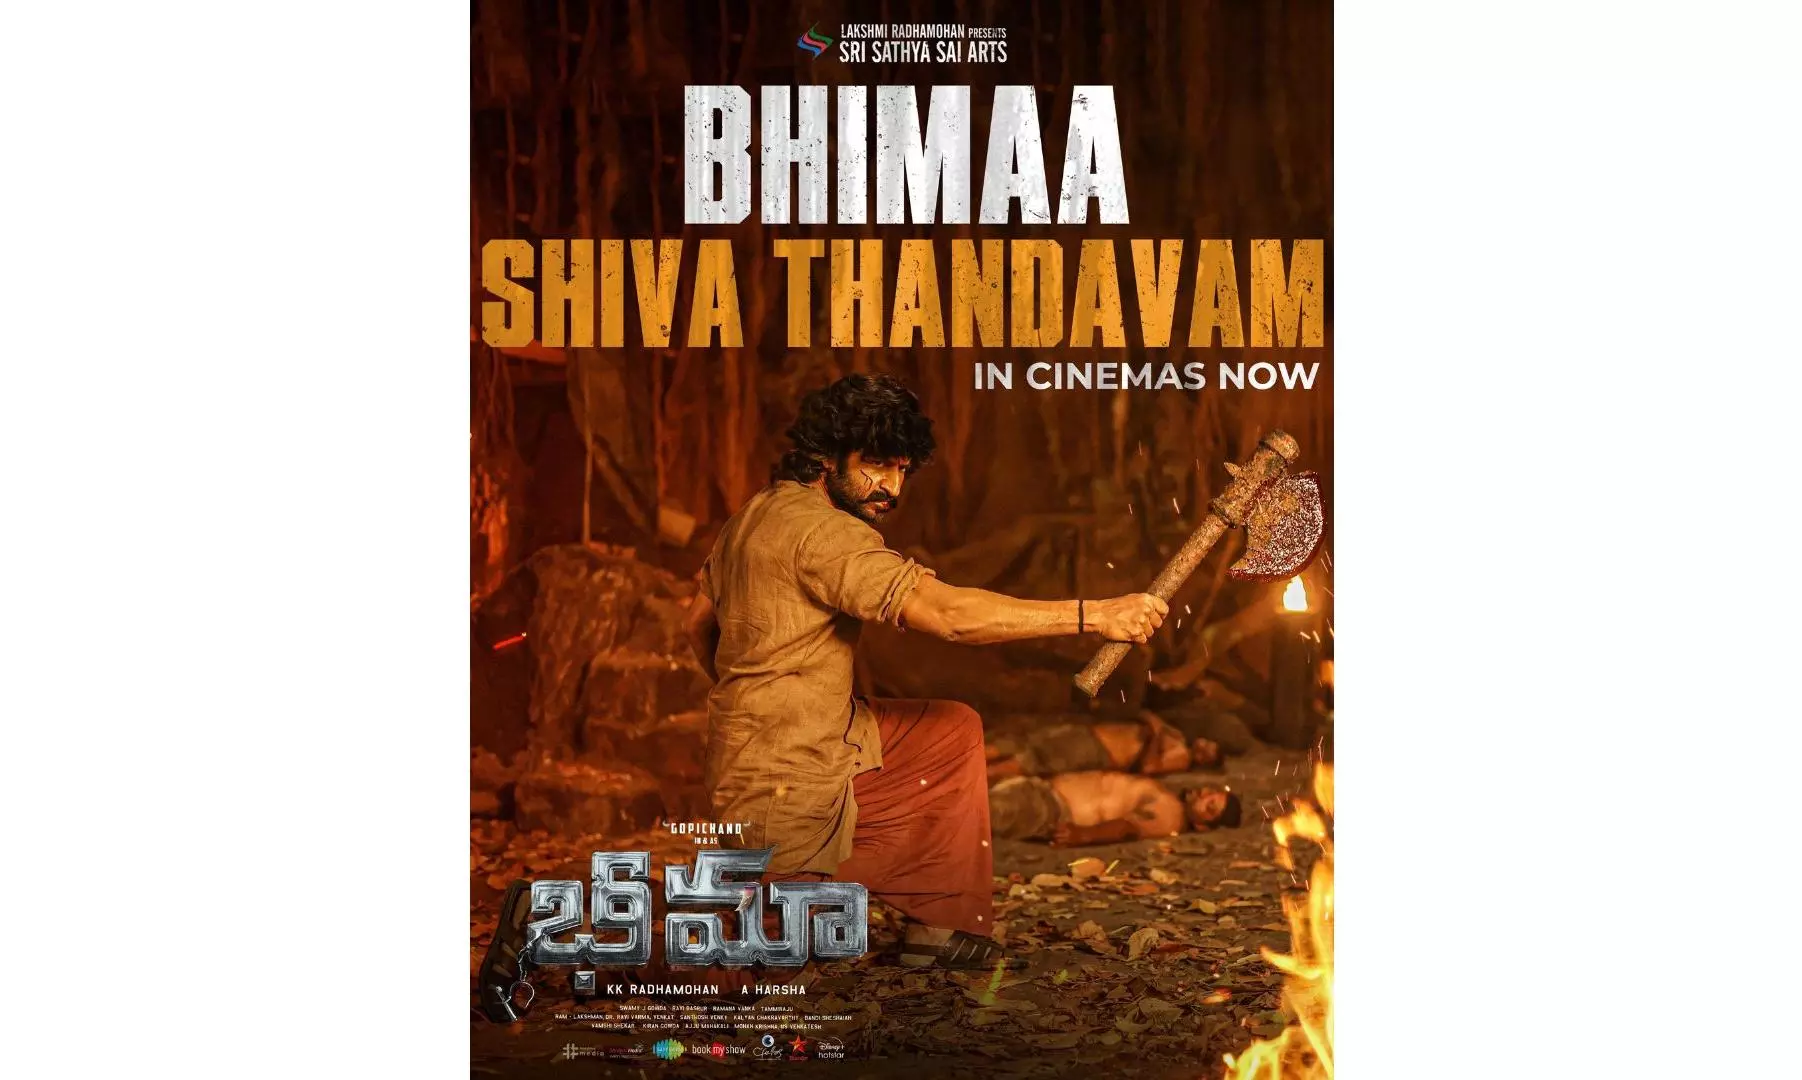 Bhimaa: A disgusting cop story with silly mystical touch